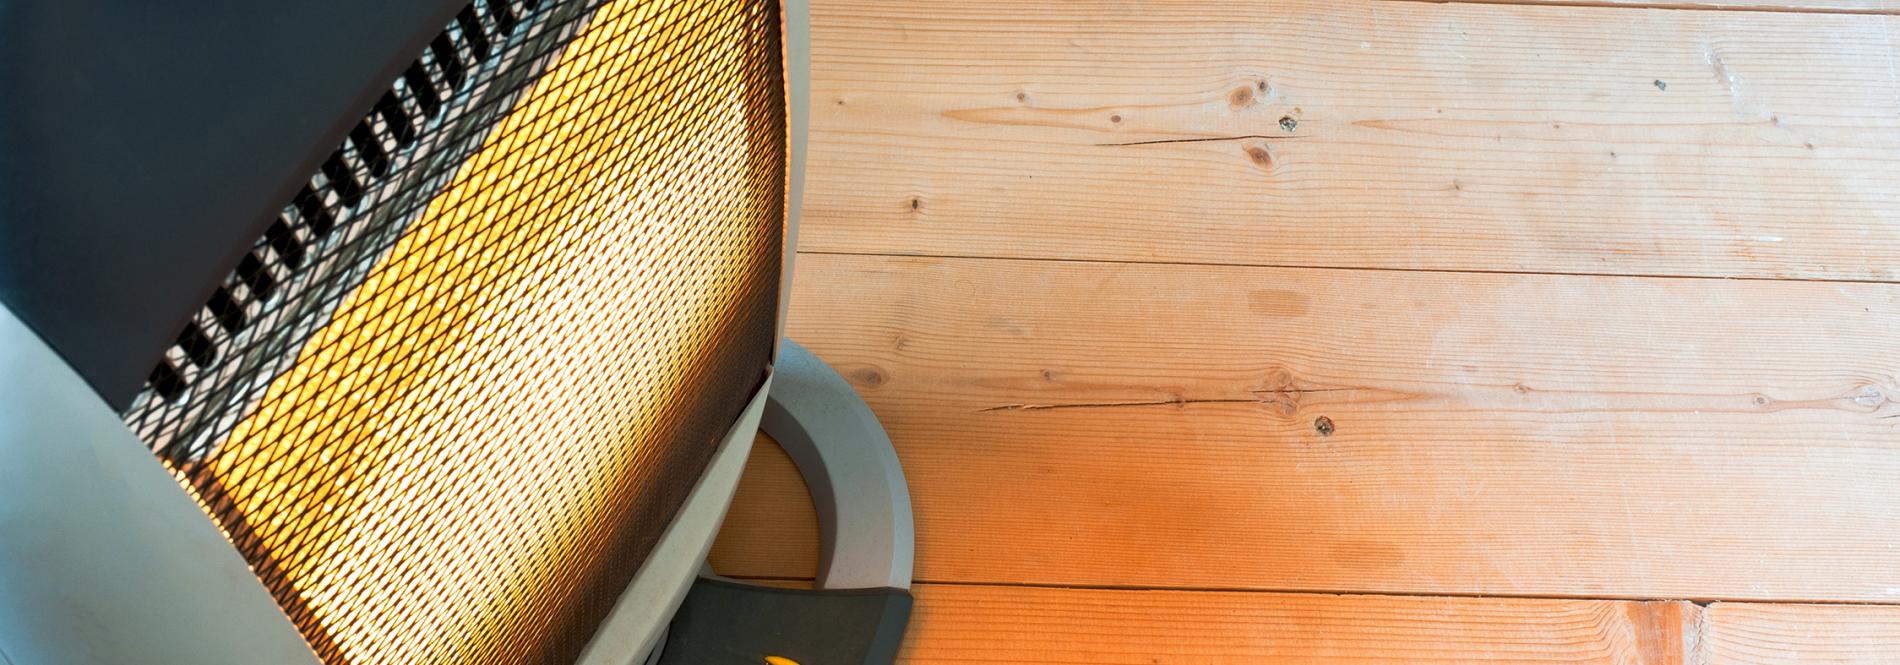 Stay warm and safe using your electric space heater this winter season